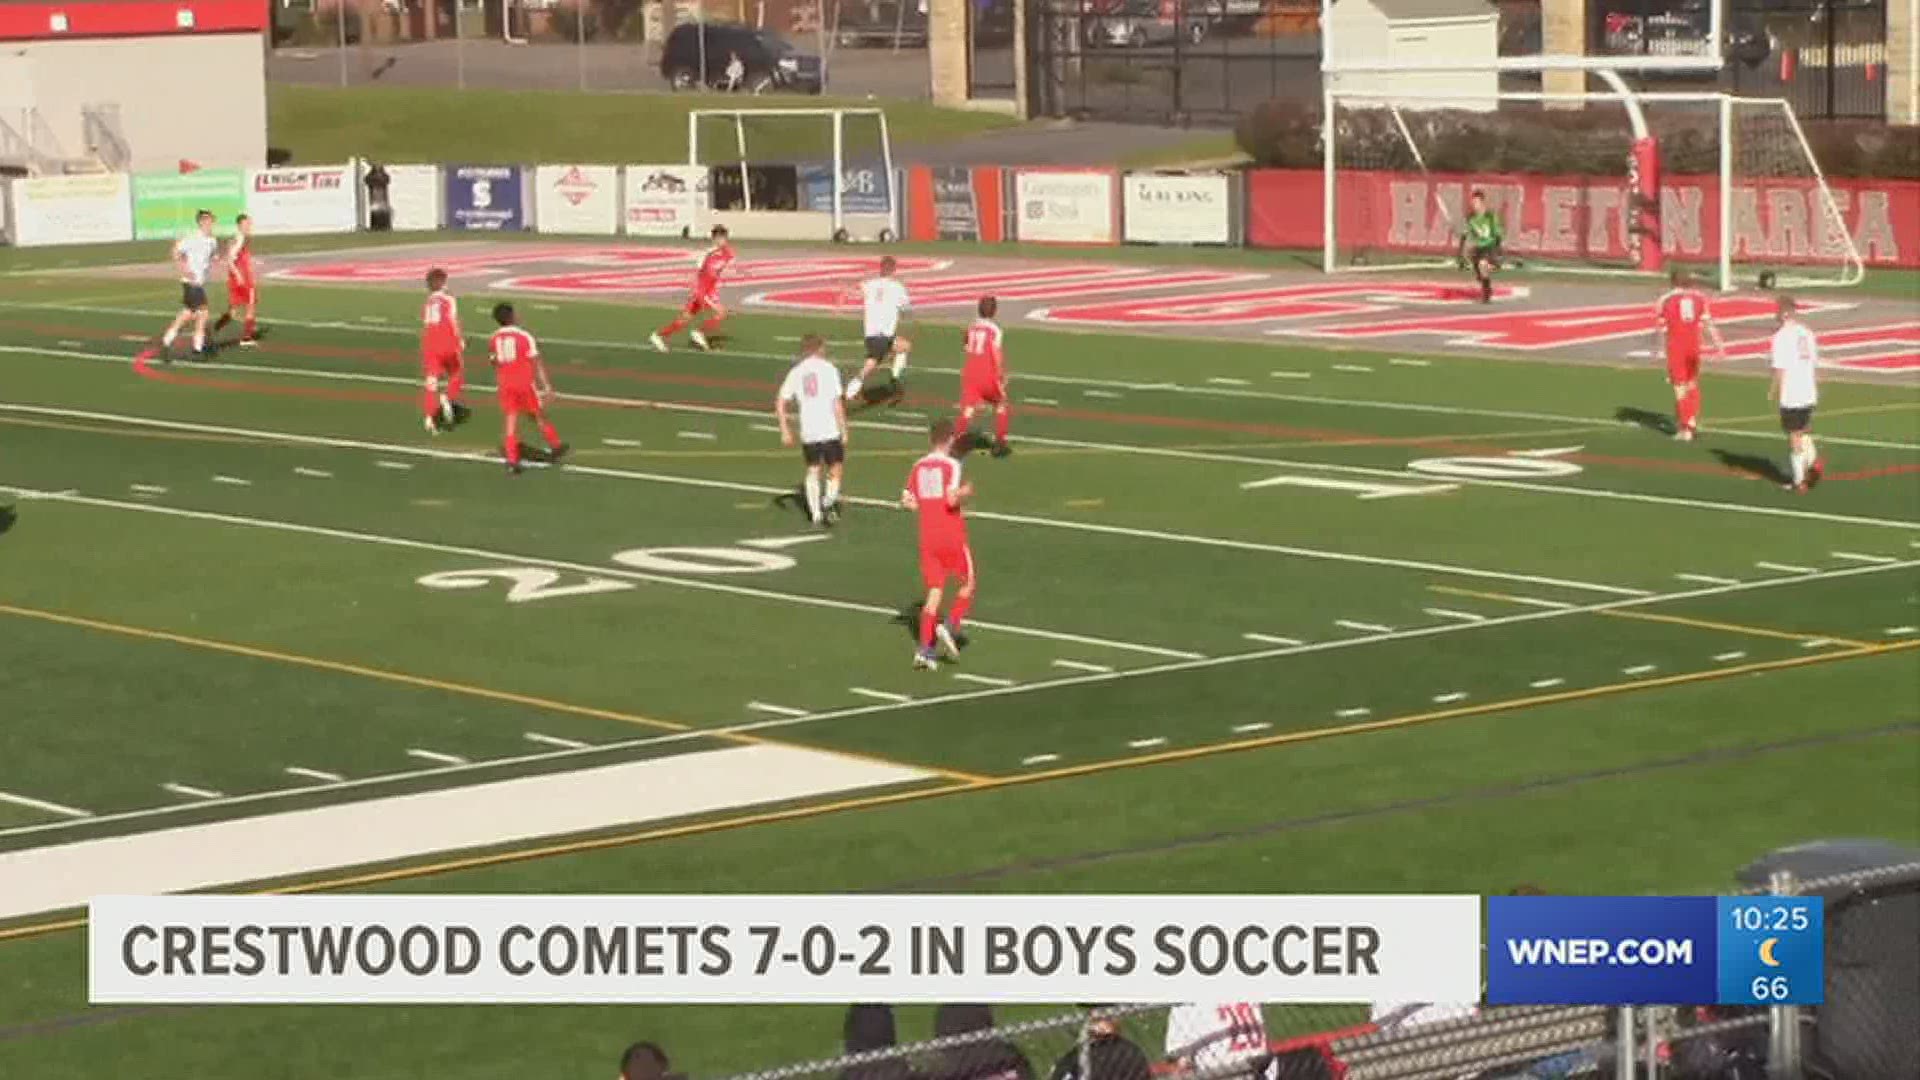 Crestwood is 7-0-2 in HS boys soccer